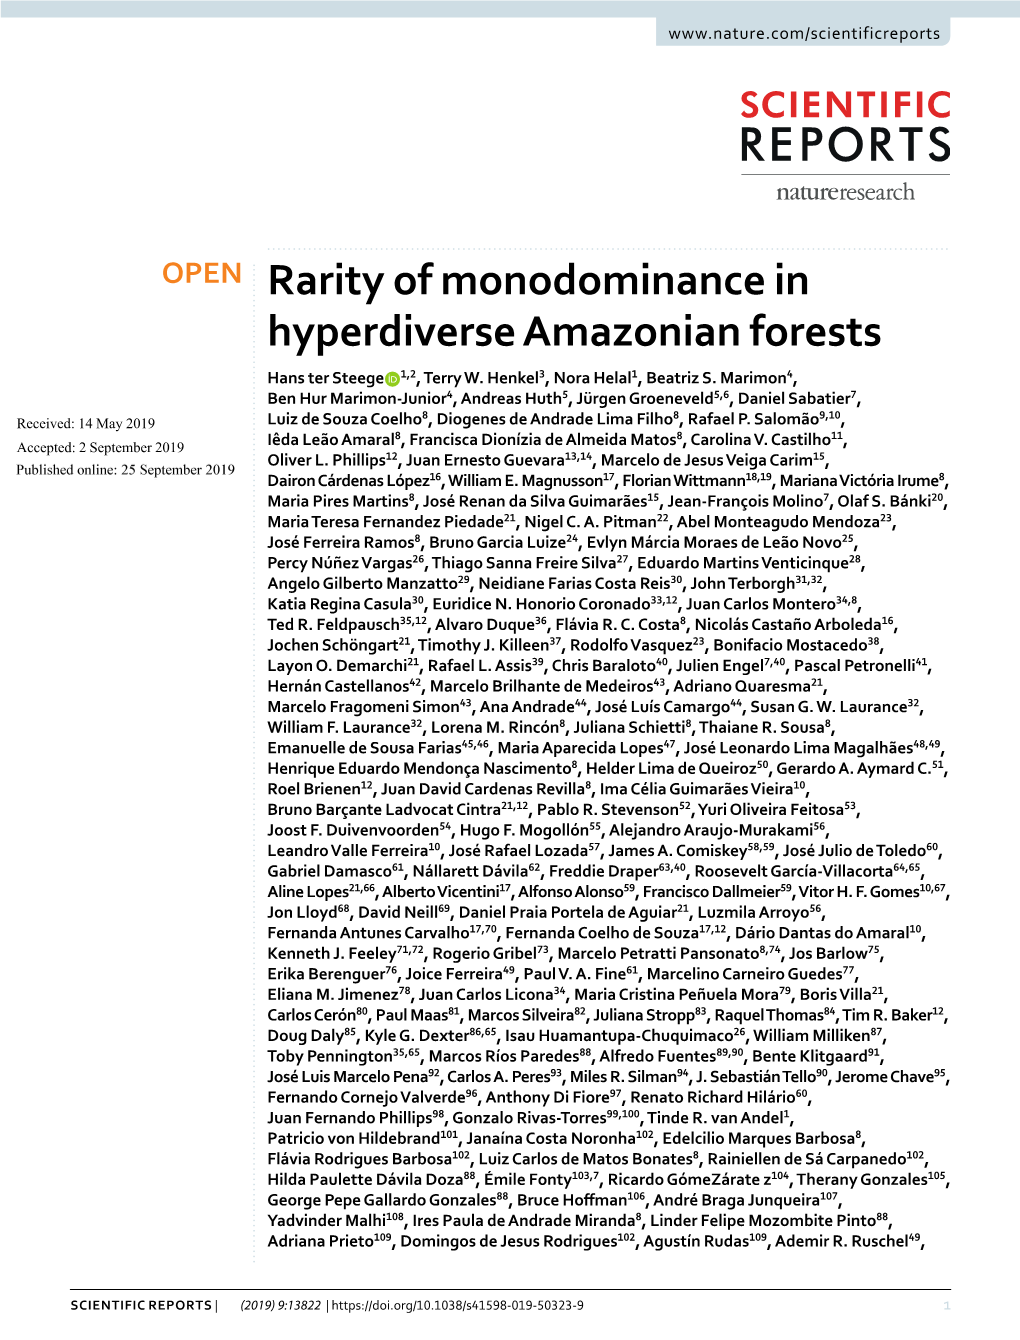 Rarity of Monodominance in Hyperdiverse Amazonian Forests Hans Ter Steege 1,2, Terry W